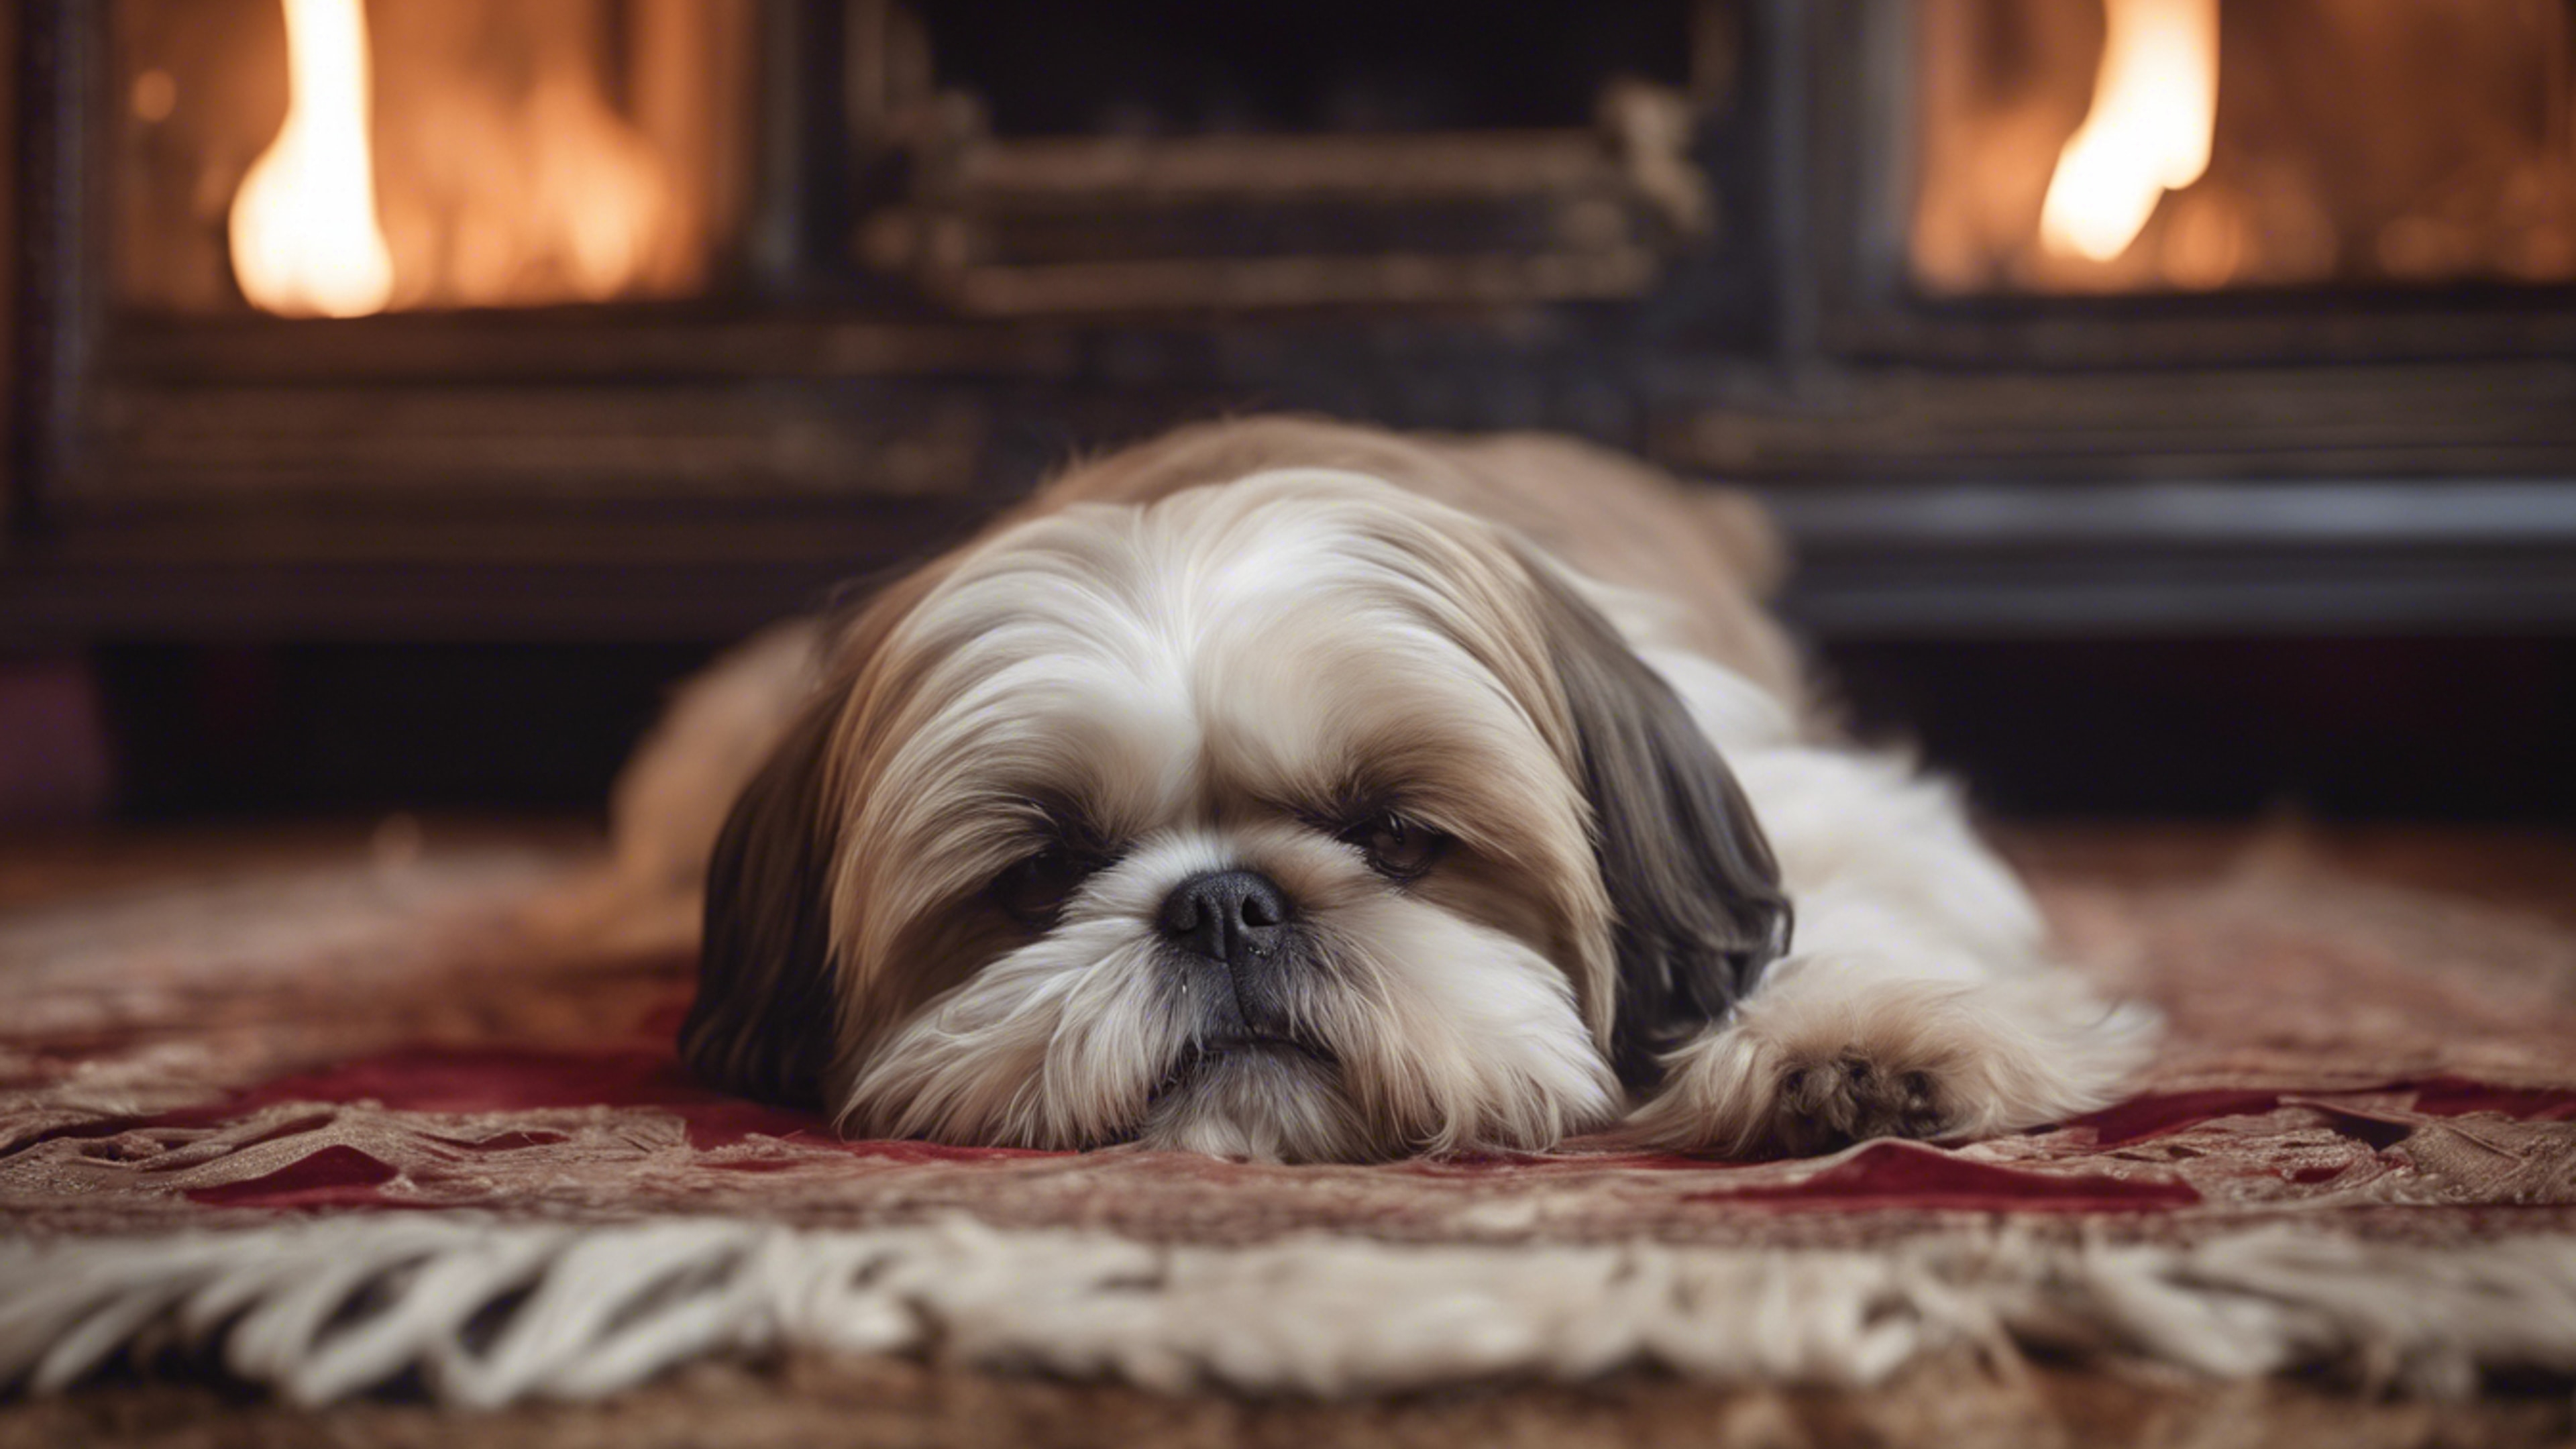 A Shih Tzu asleep on a plush velvet rug in a Victorian-era room, a roaring fire in the background.壁紙[cad68c0a080d4f179ad5]